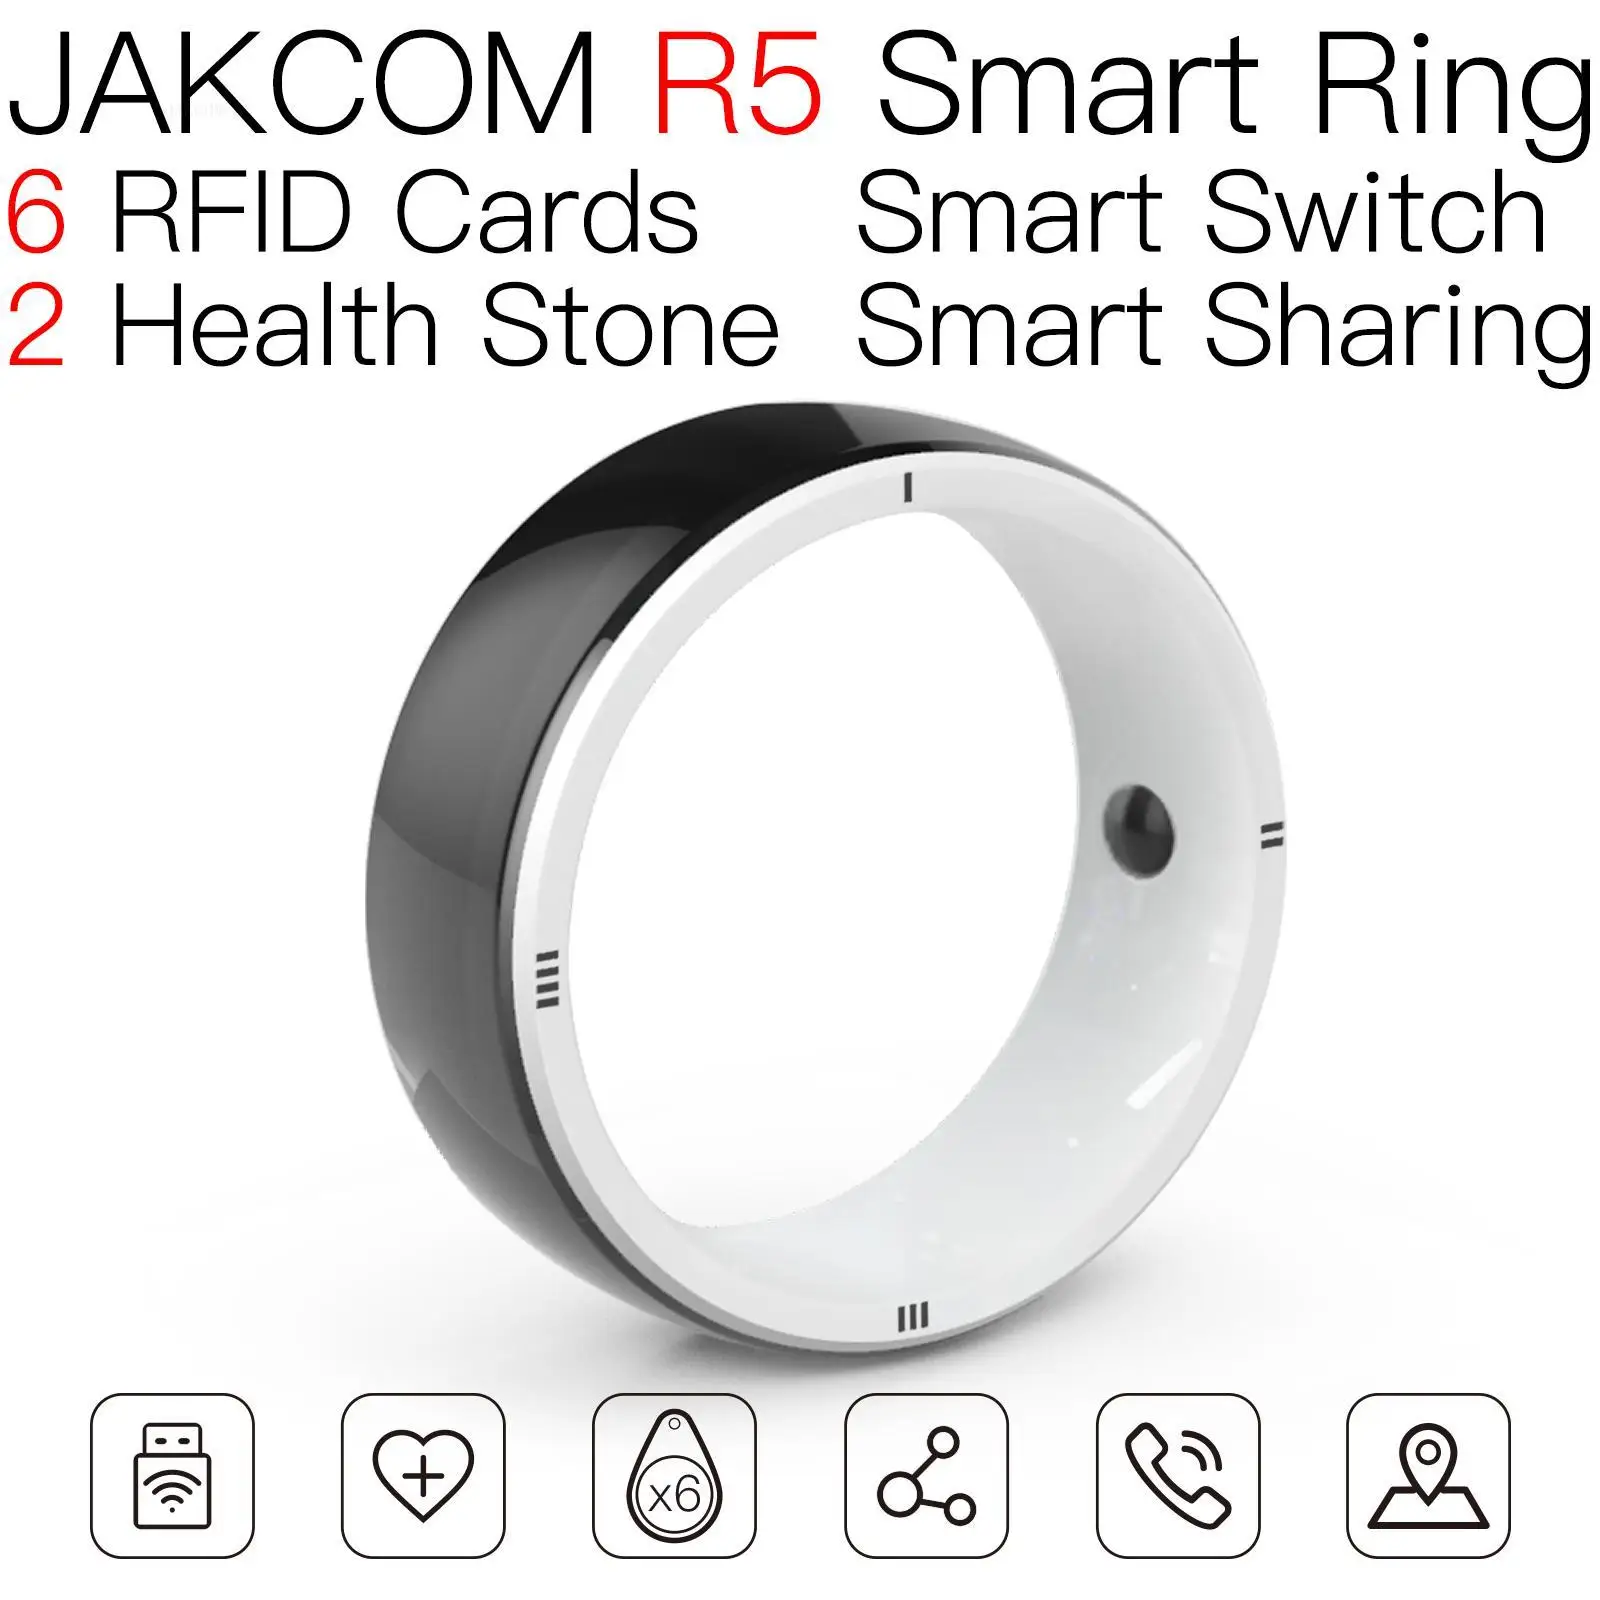 

JAKCOM R5 Smart Ring better than 9662 uhf reloading card inkjet printable rfid tags programmable tag nfc animal injection